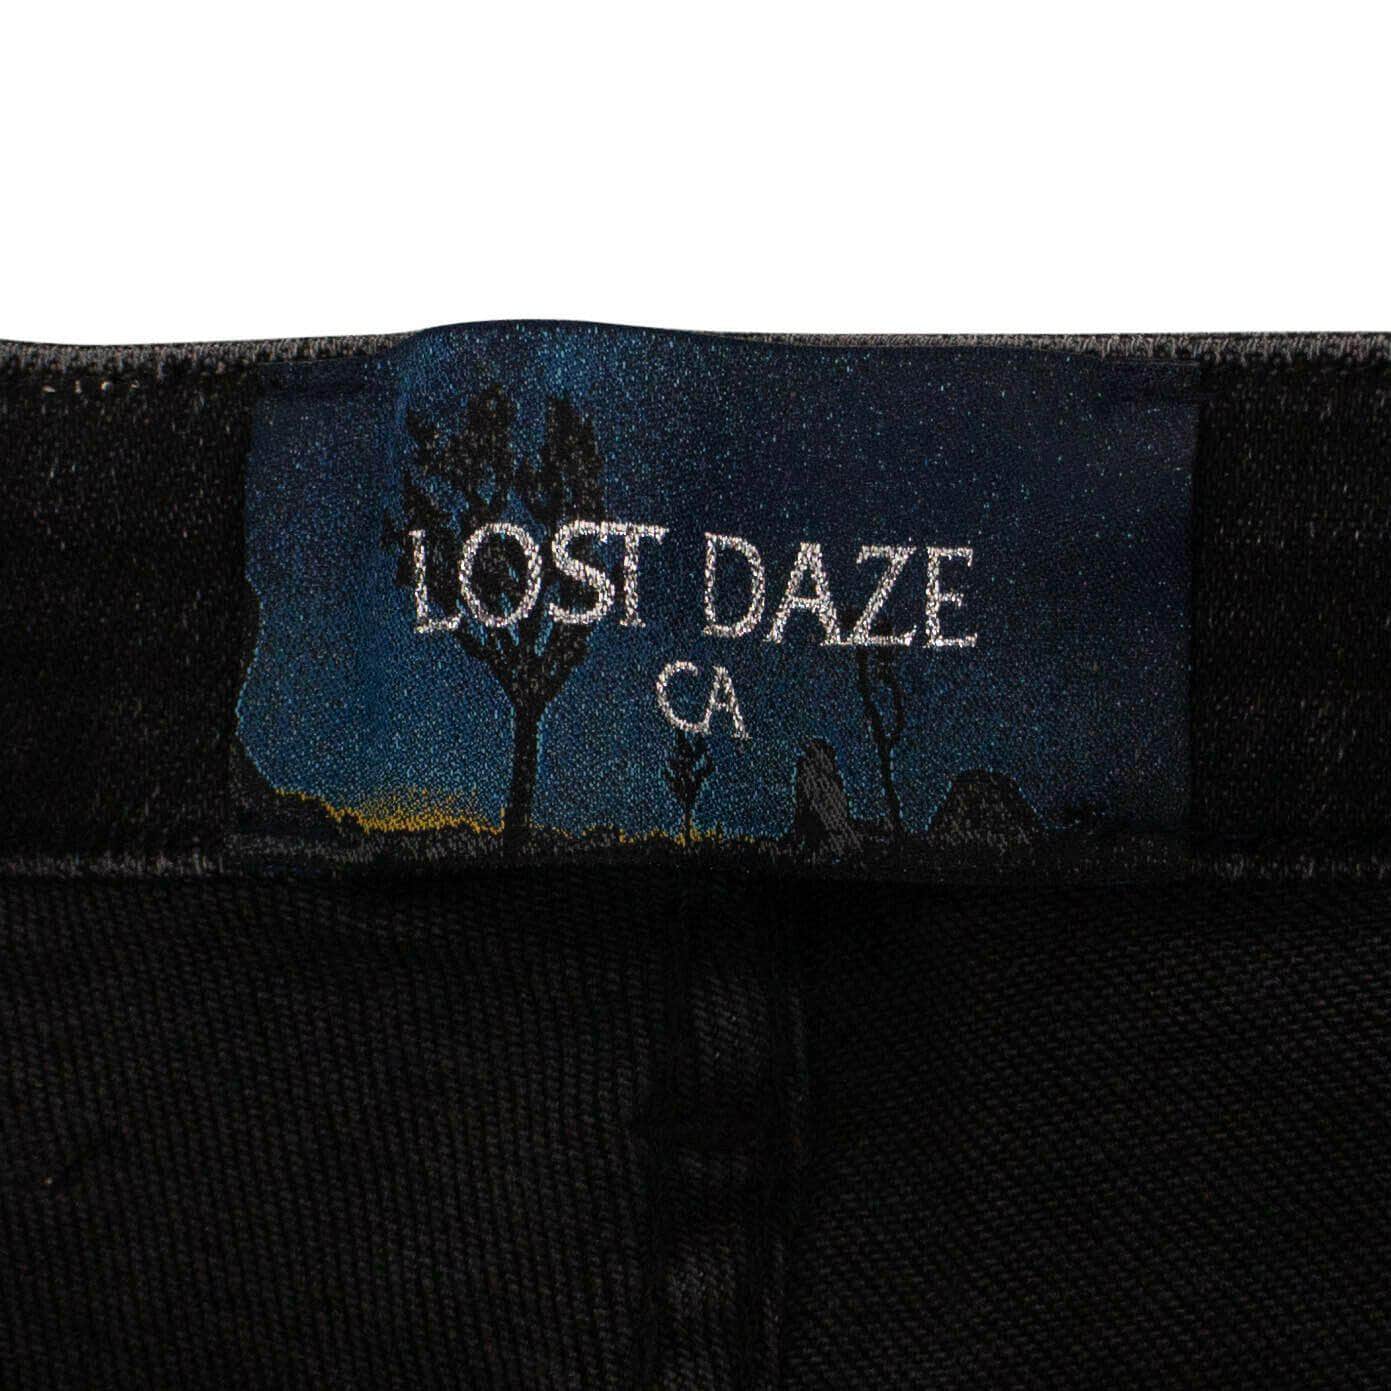 Lost Daze chicmi, couponcollection, gender-womens, july4th, lost-daze, main-clothing, MBUP, SPO, stadiumgoods, under-250, womens-jeans 27 / 69LE-1854/27 Lost Daze Cotton Wave Flame Spandex Waist Jeans - White 69LE-1854/27 69LE-1854/27